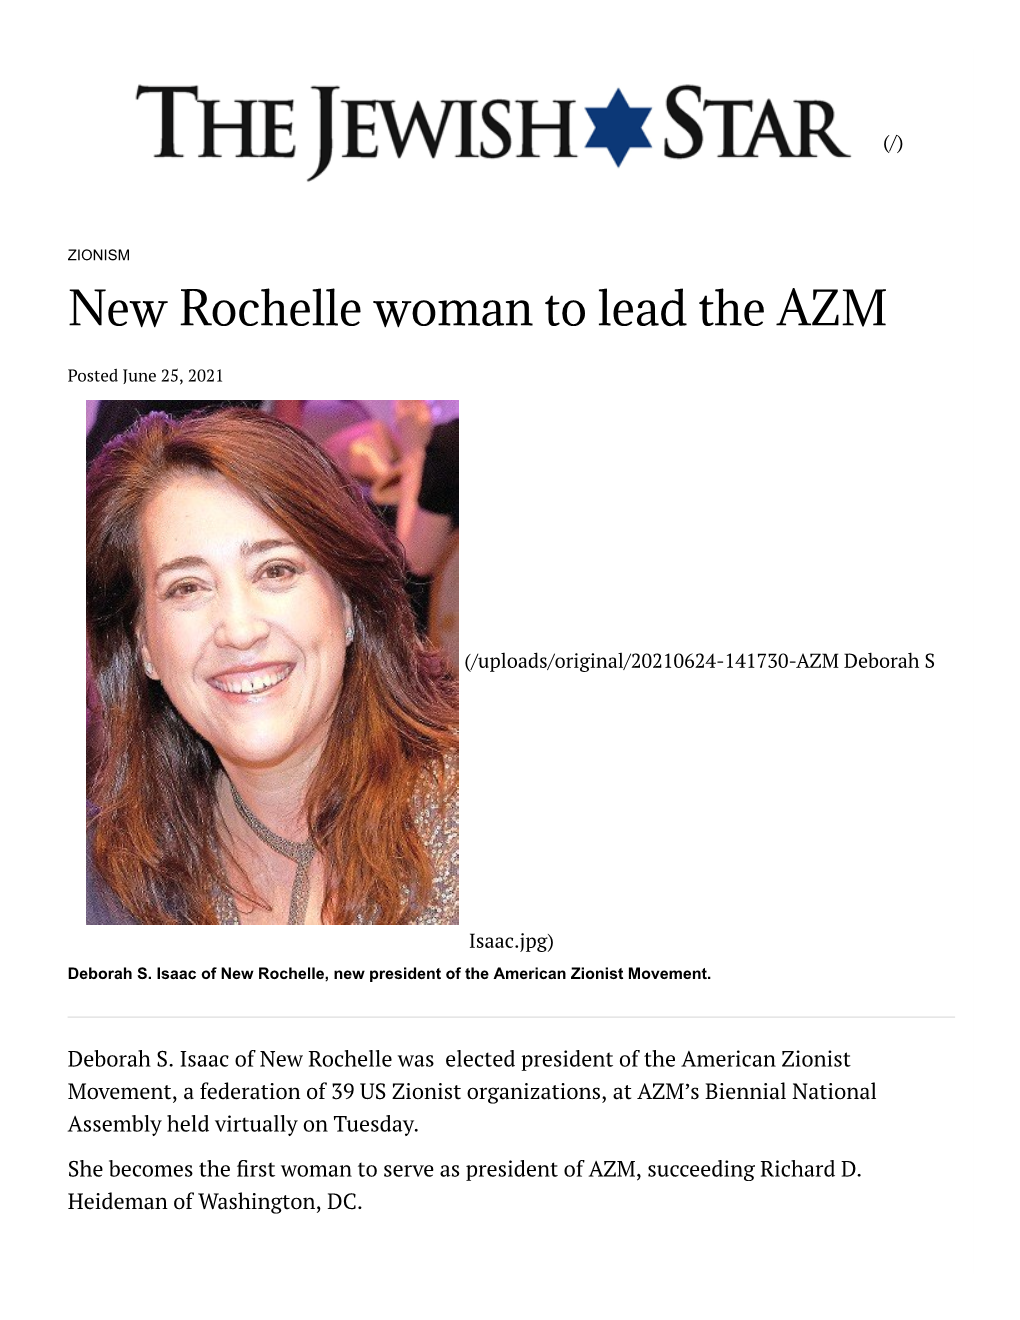 New Rochelle Woman to Lead the AZM